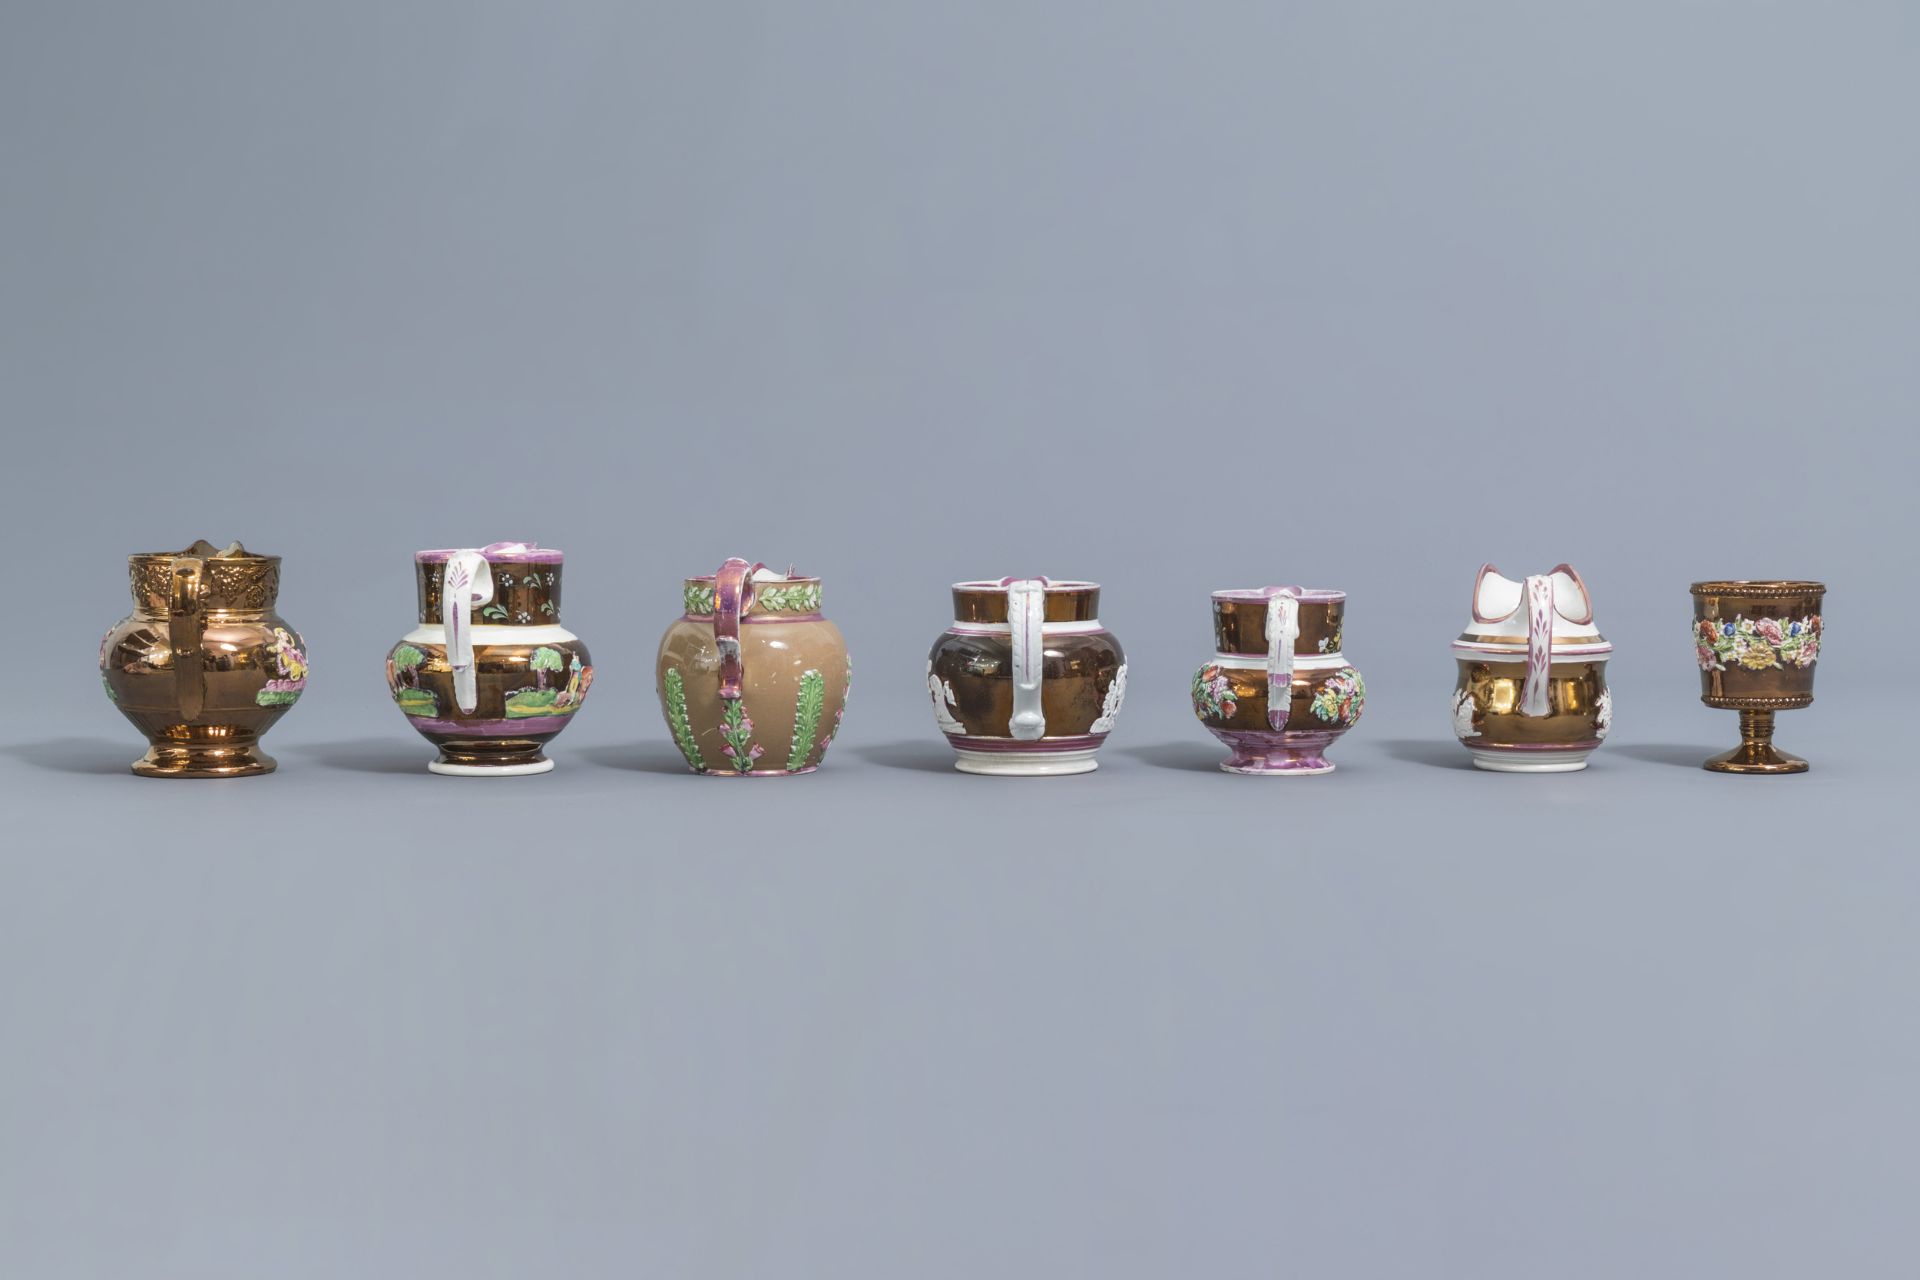 A varied collection of English lustreware items with relief design, 19th C. - Image 30 of 50